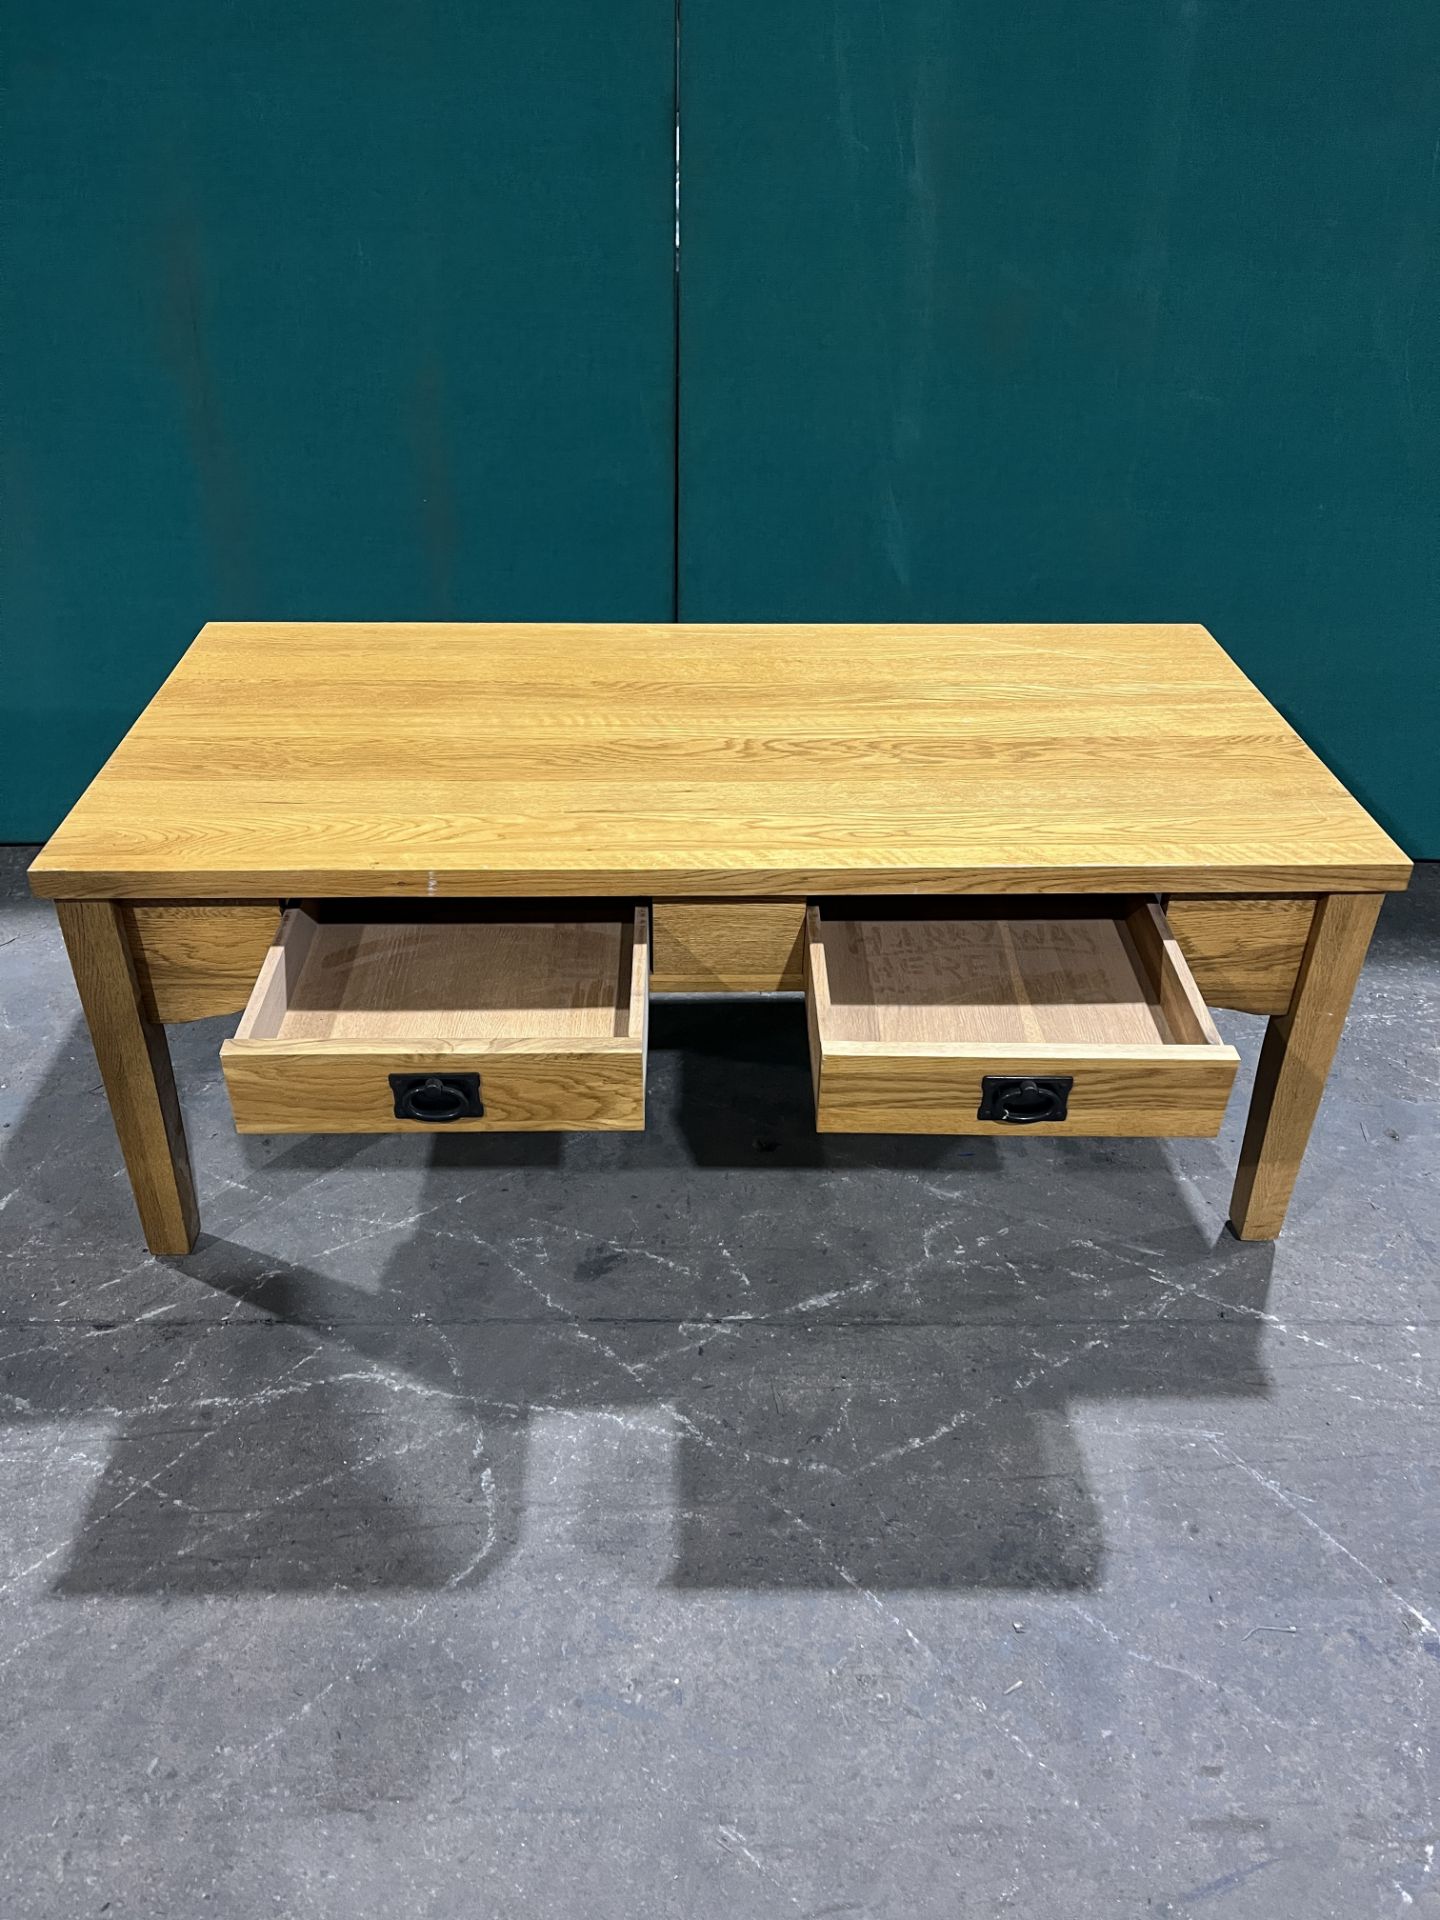 Oak Coffee Table w 2 Drawers - Image 2 of 6